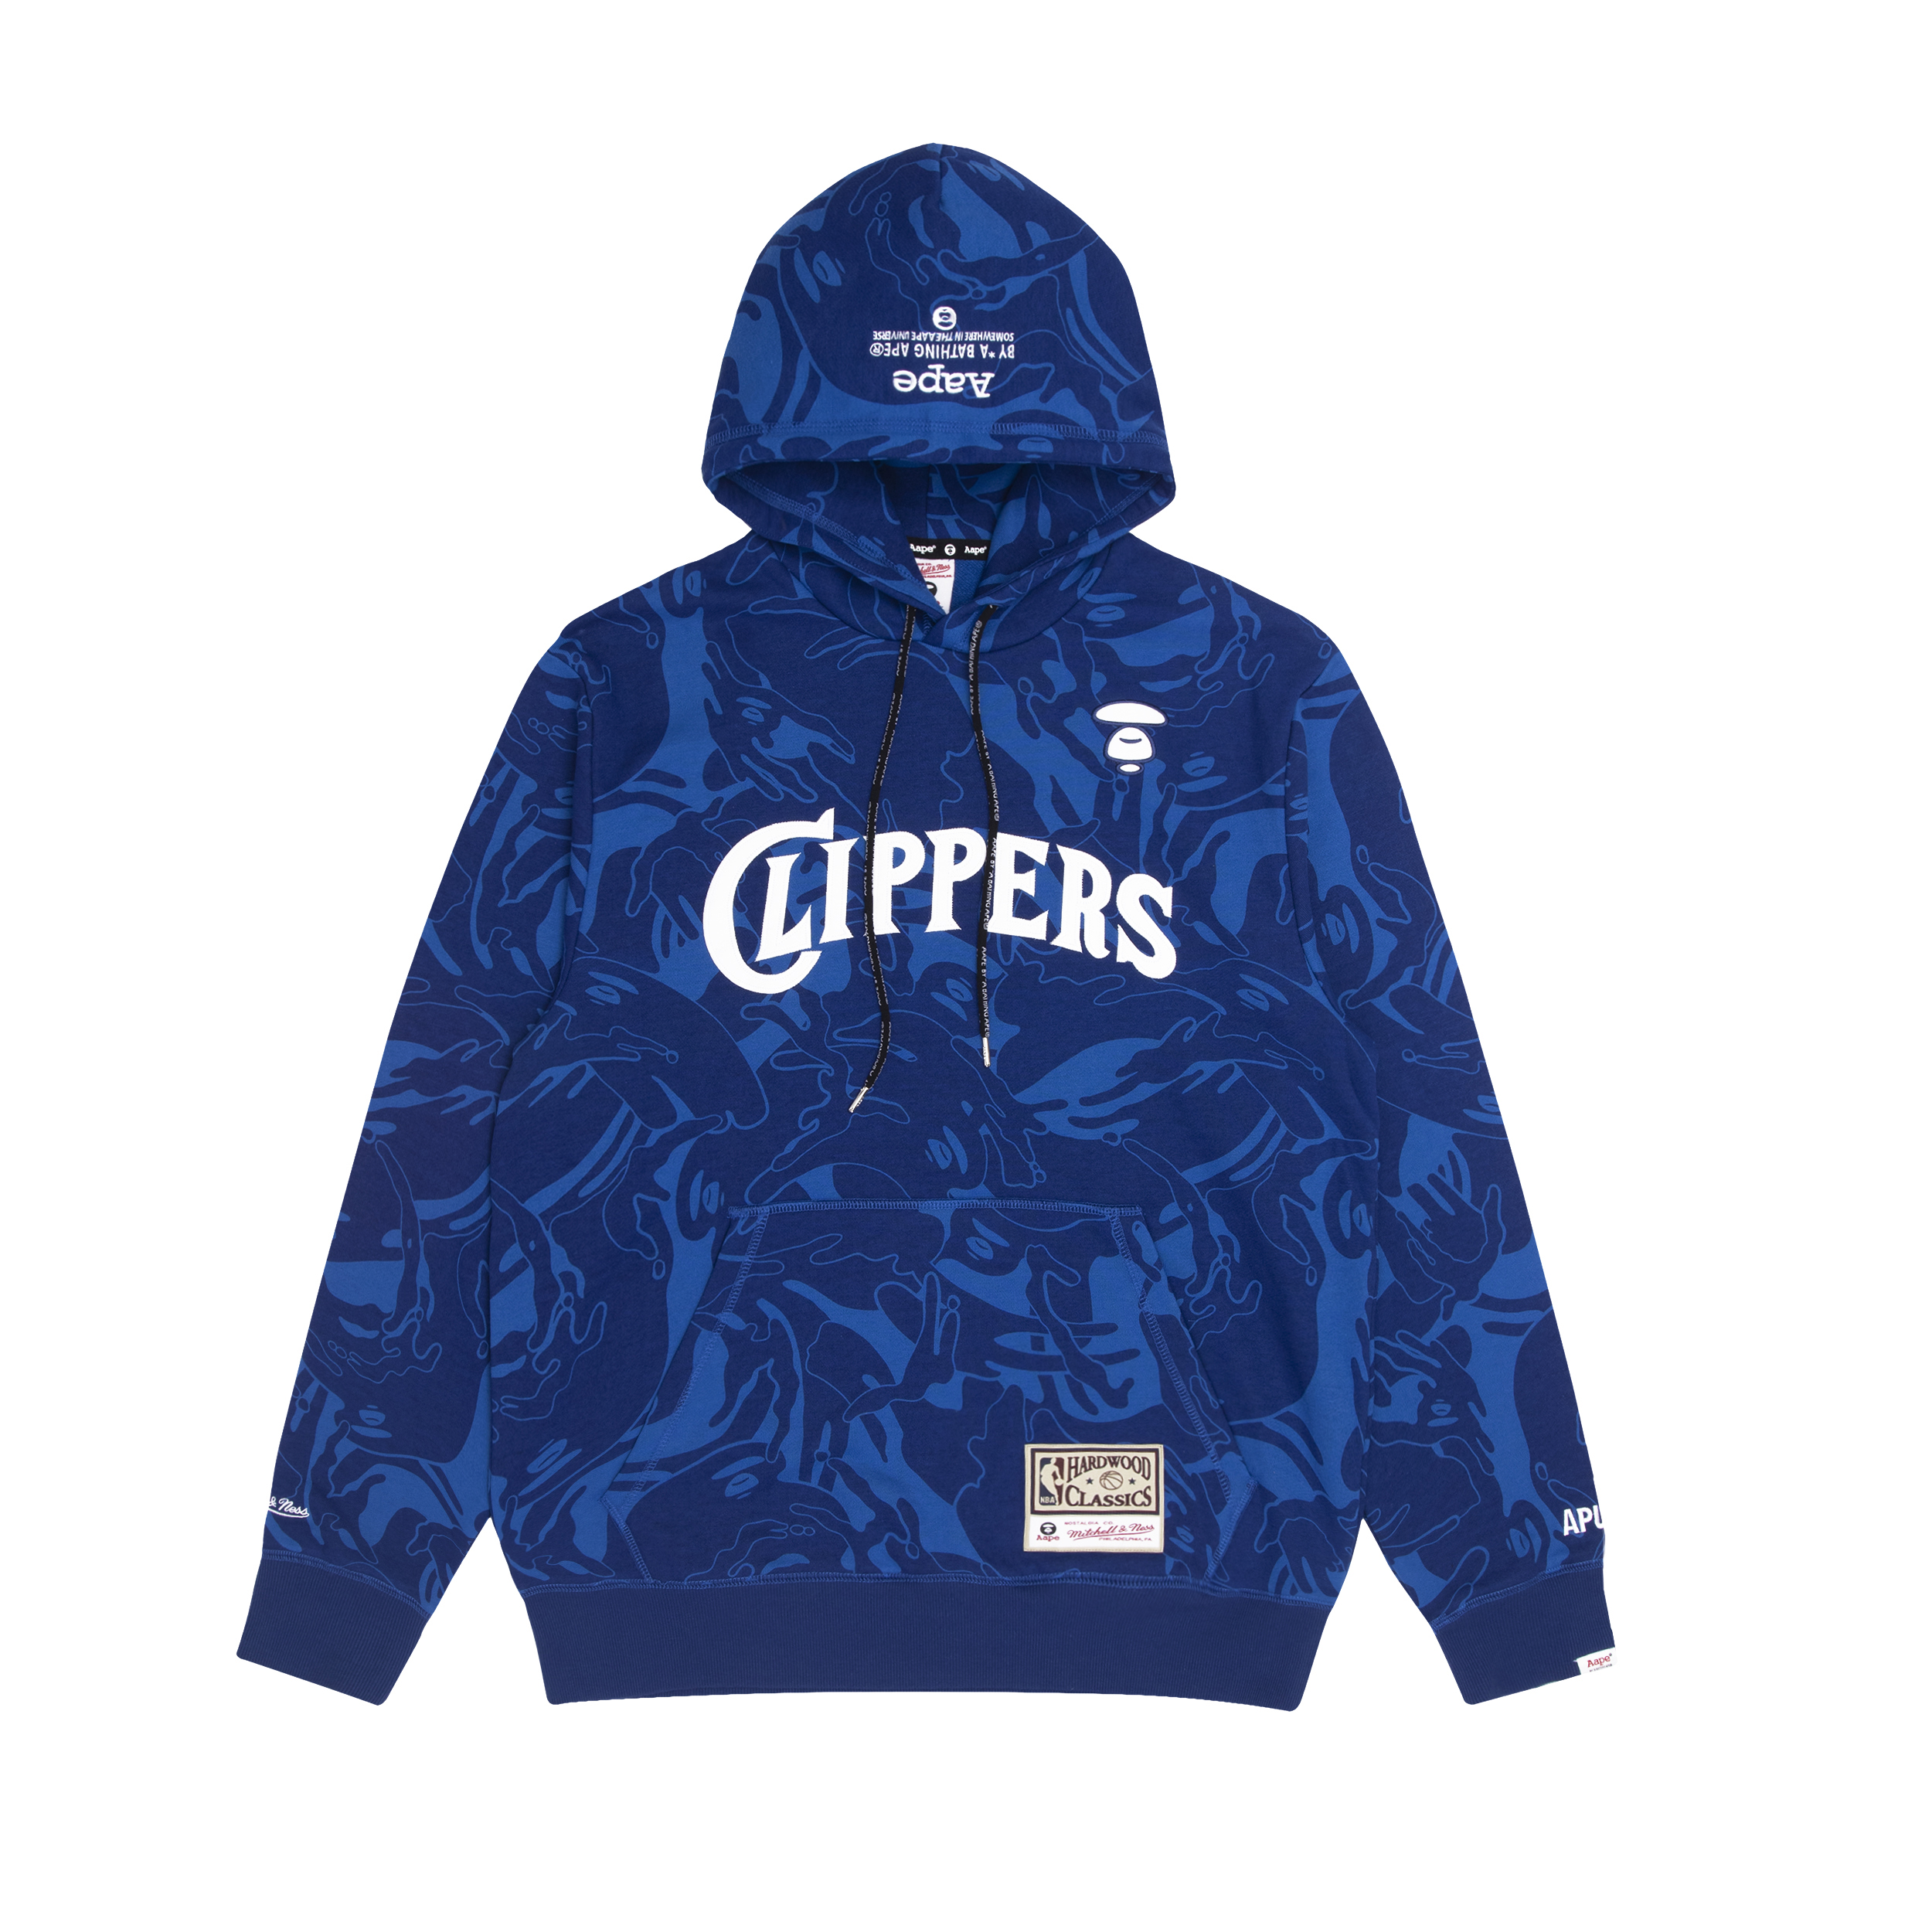 x mitchell & ness clippers hoodie